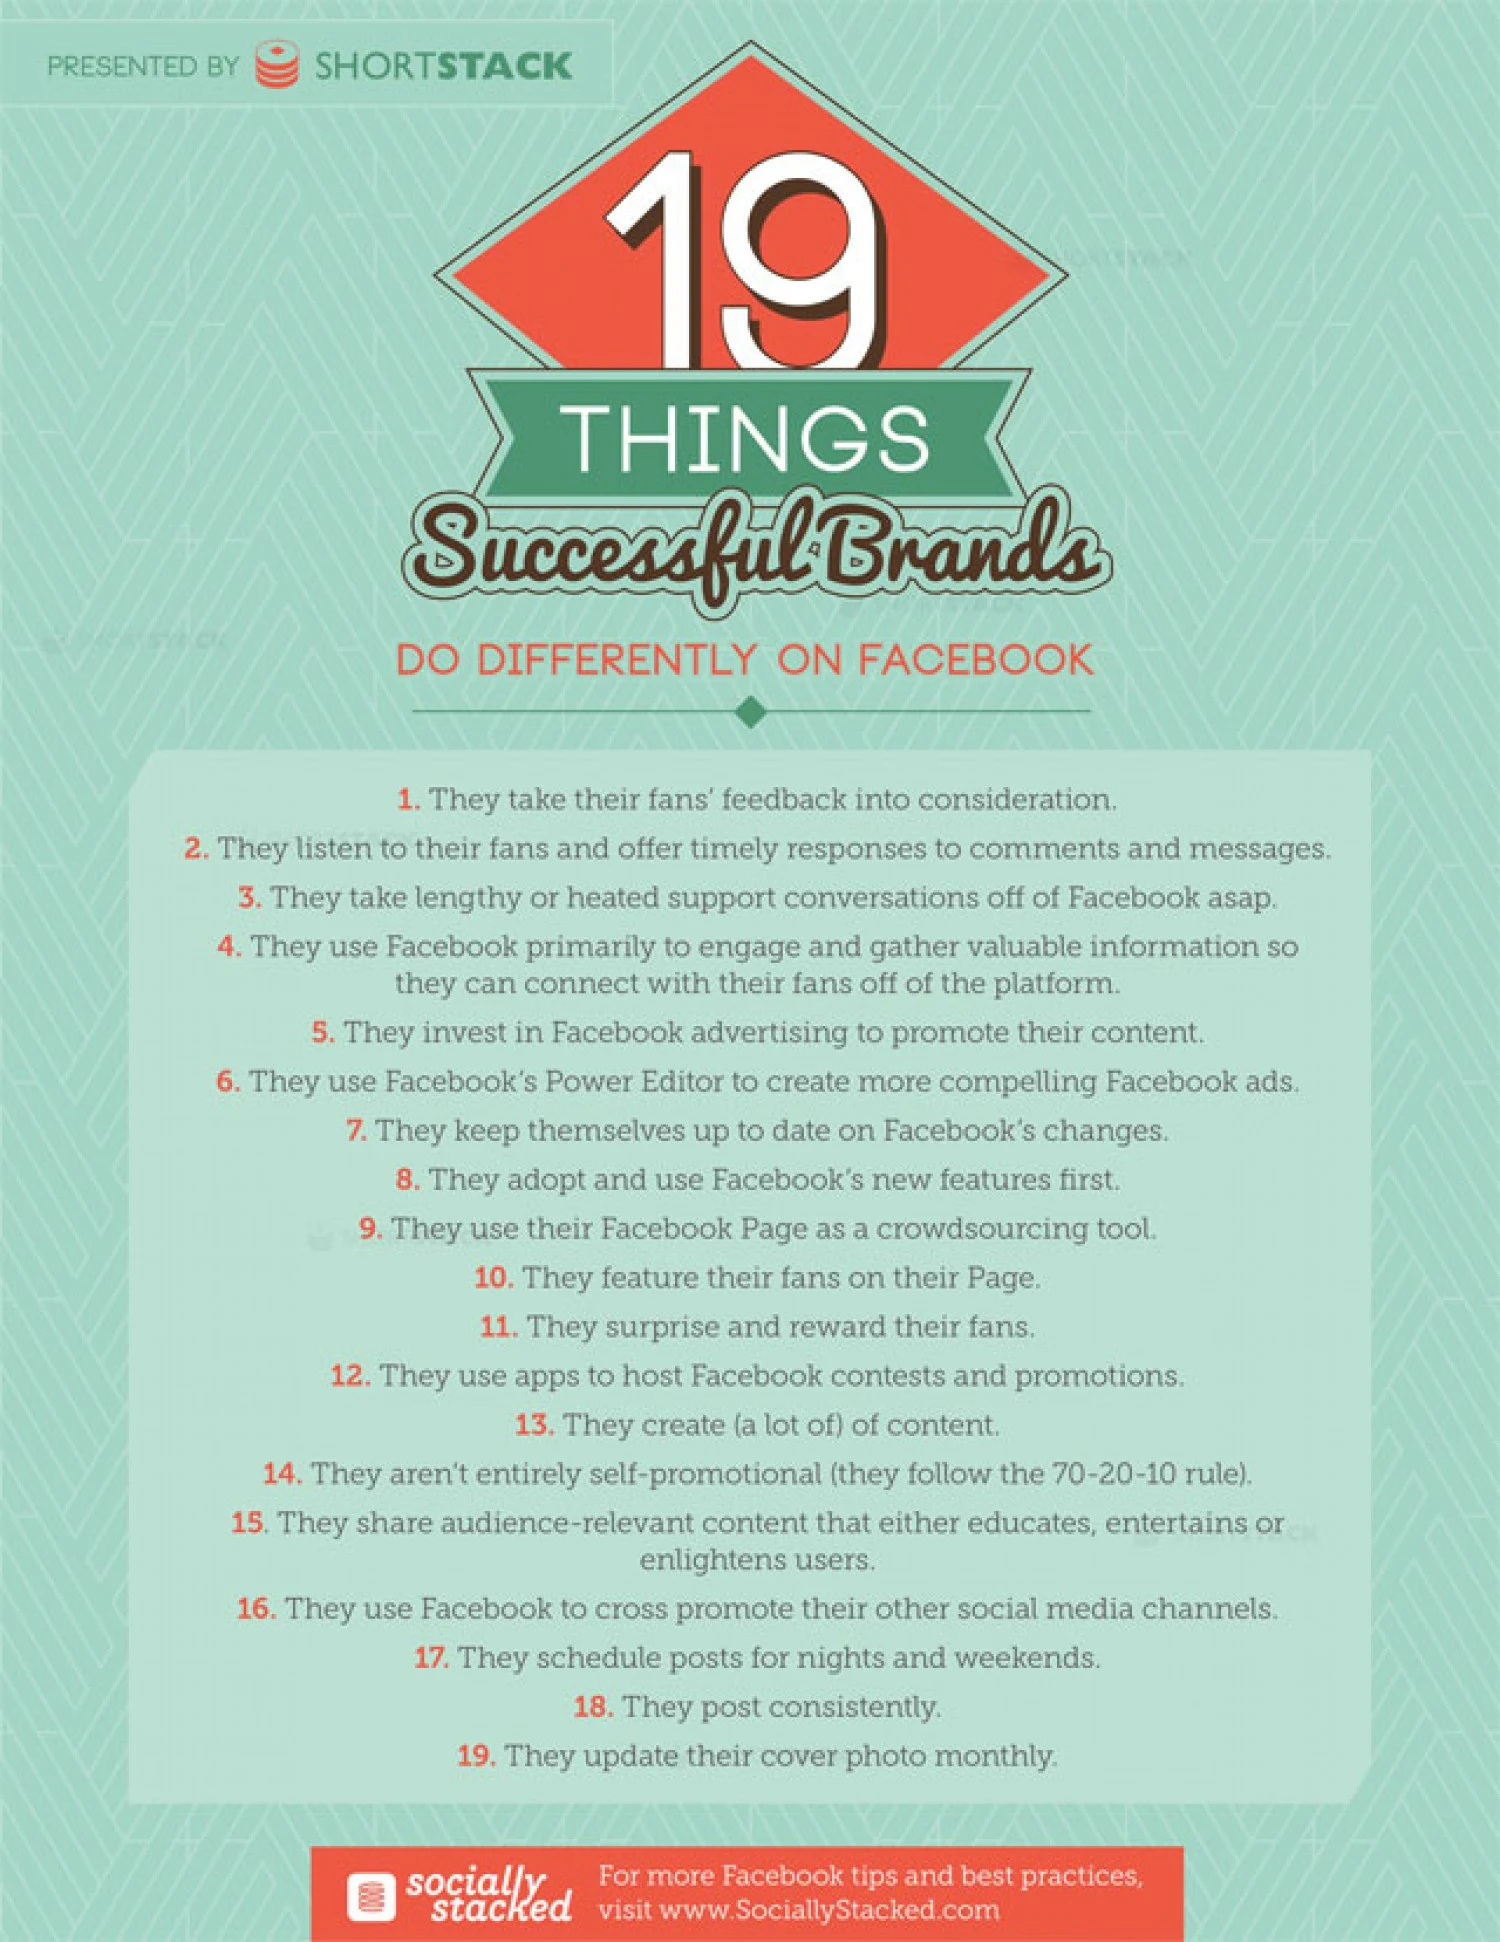 19 Things Successful Brands Do Differently on Facebook - infographic